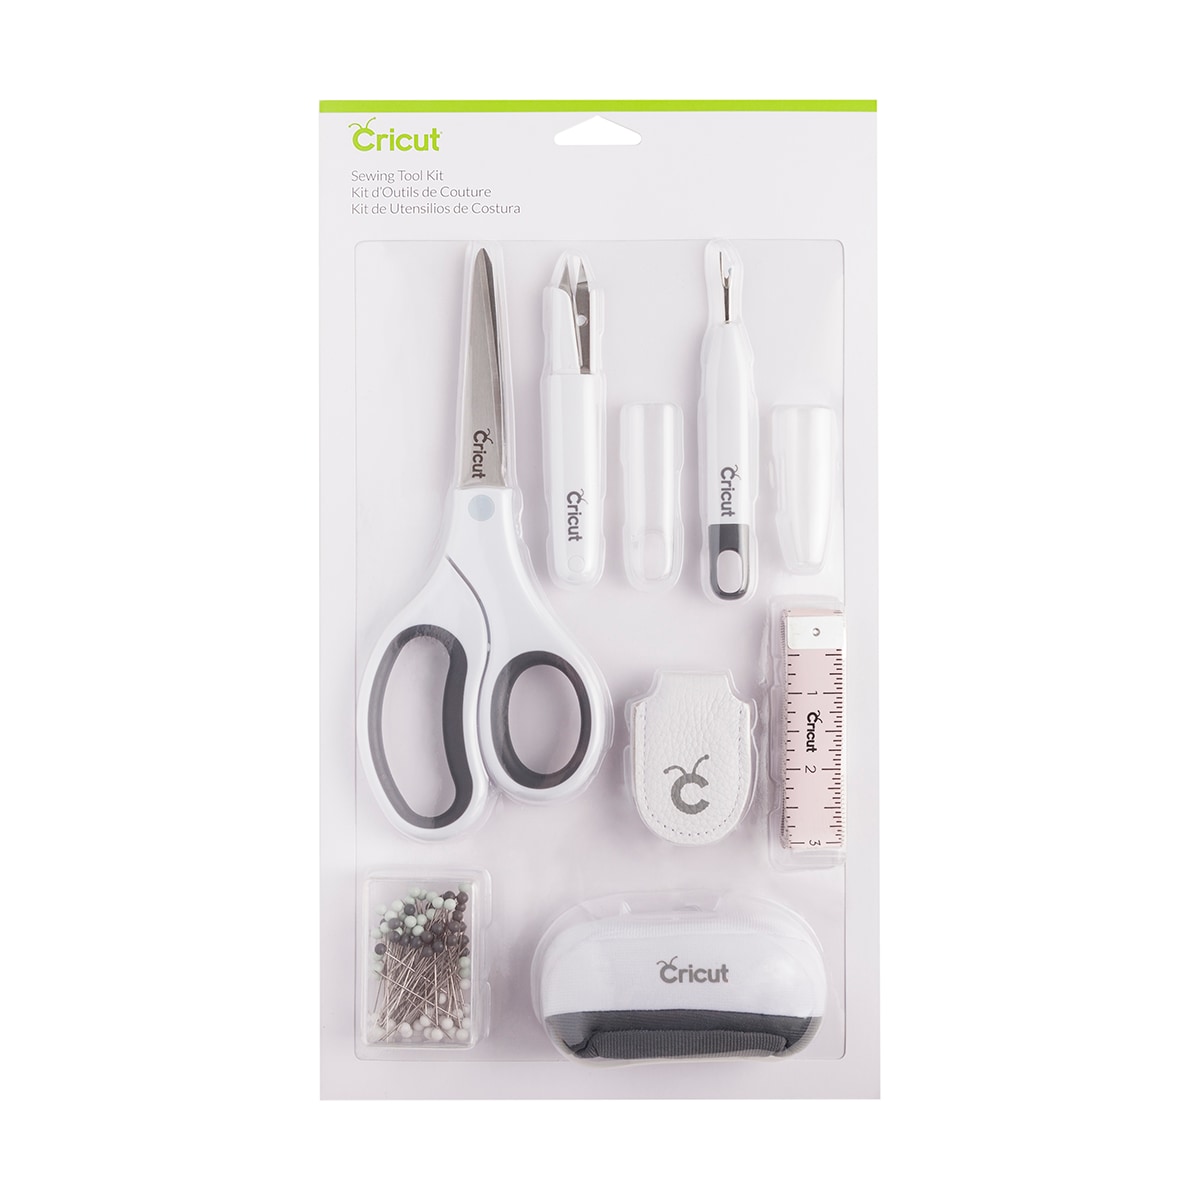 Cricut basic tool set NEW - Only Removed From Package And Not Used